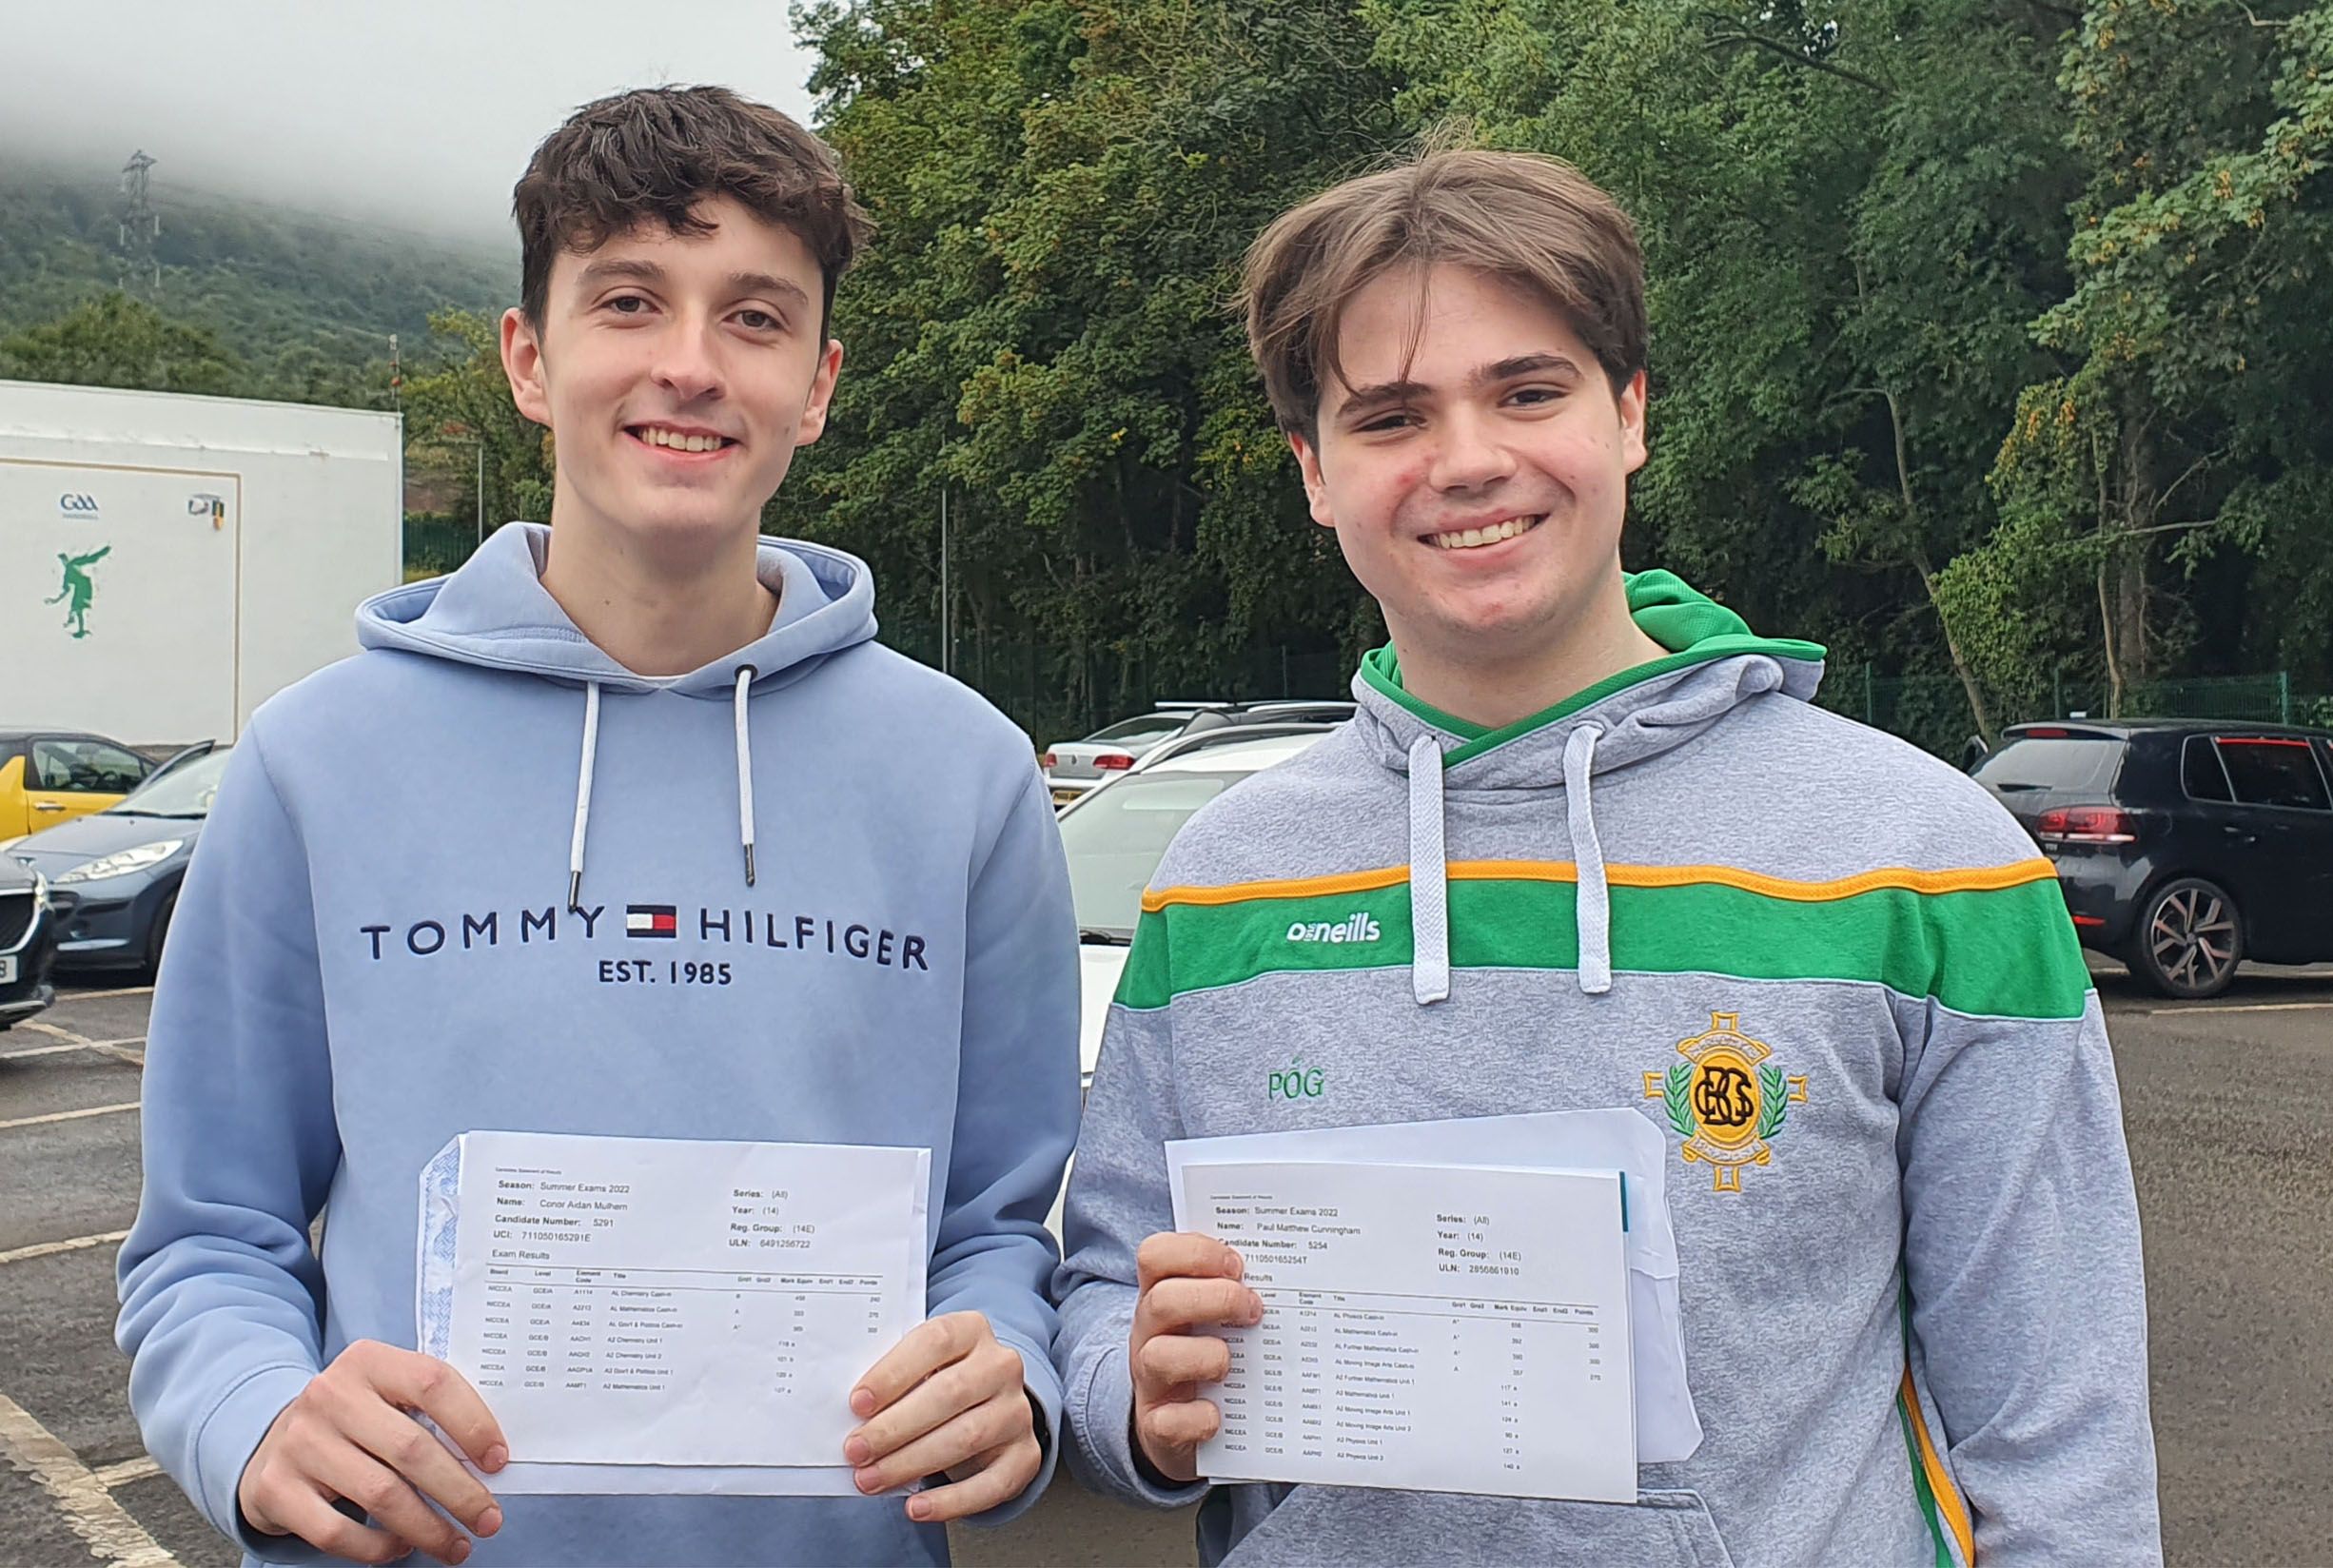 TOP MARKS: Conor Mulhern and Paul Cunningham, right, with their results